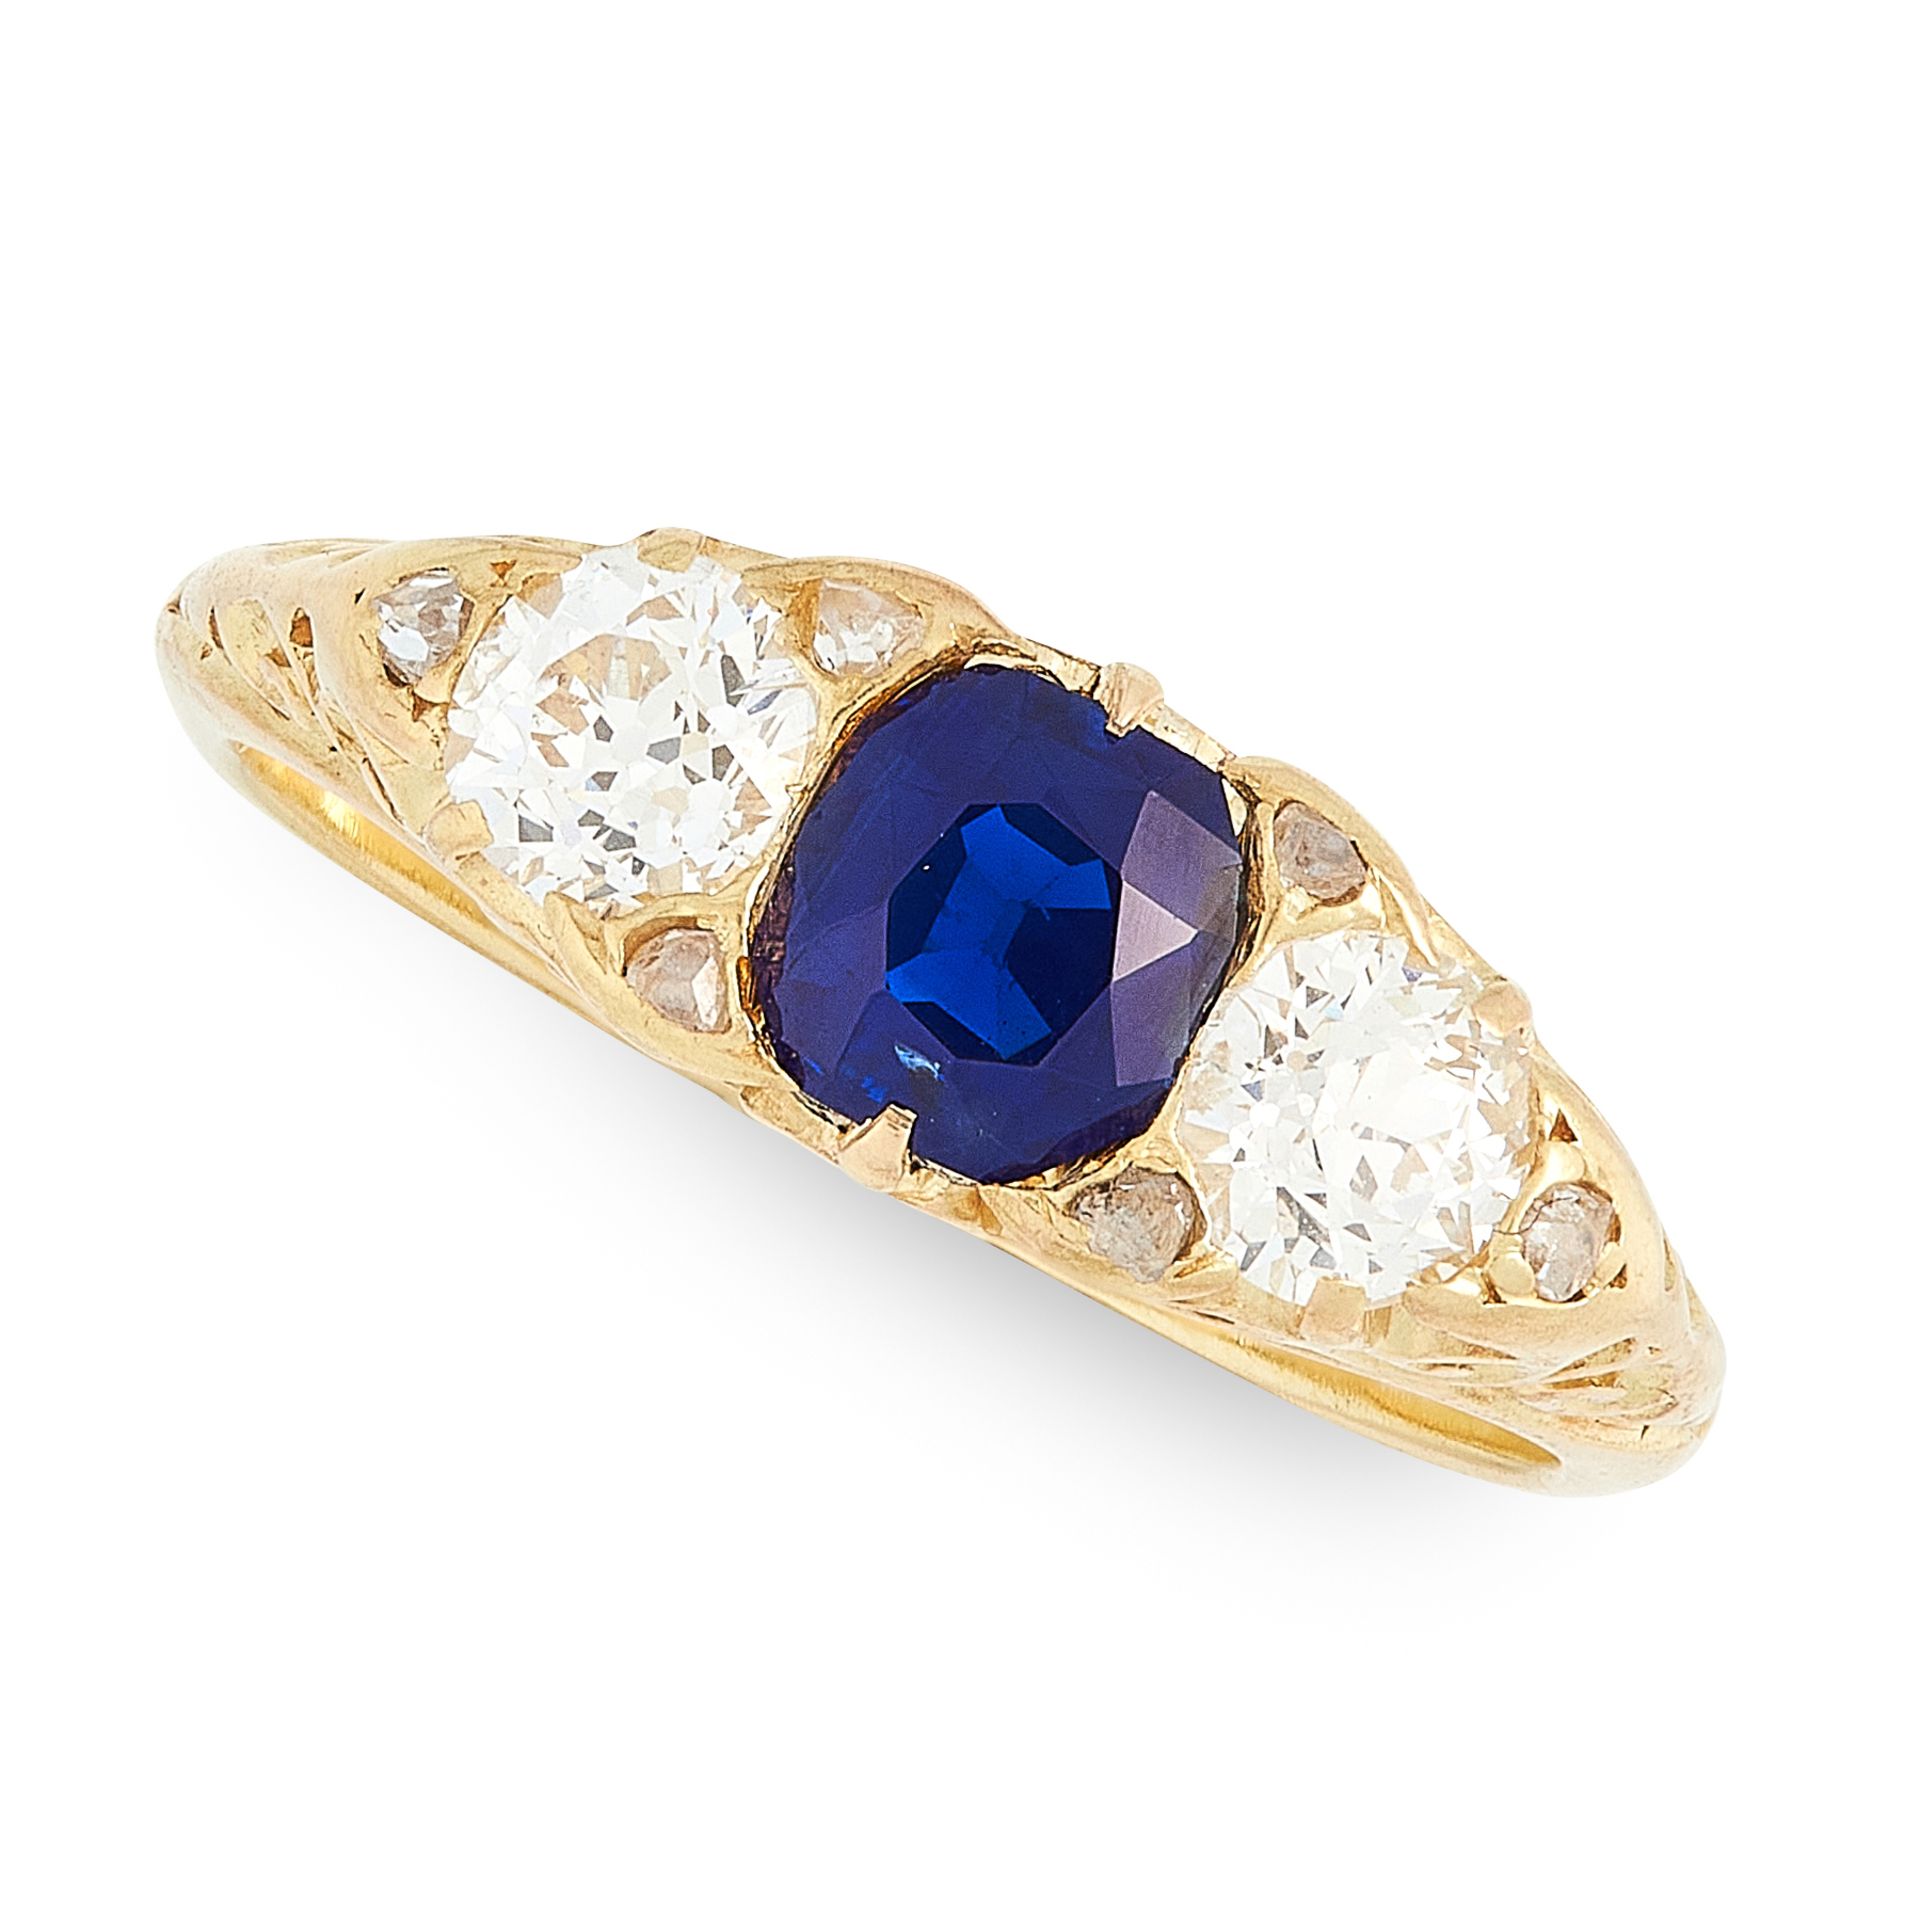 AN ANTIQUE SAPPHIRE AND DIAMOND RING, CIRCA 1900 in high carat yellow gold, set with a cushion cut